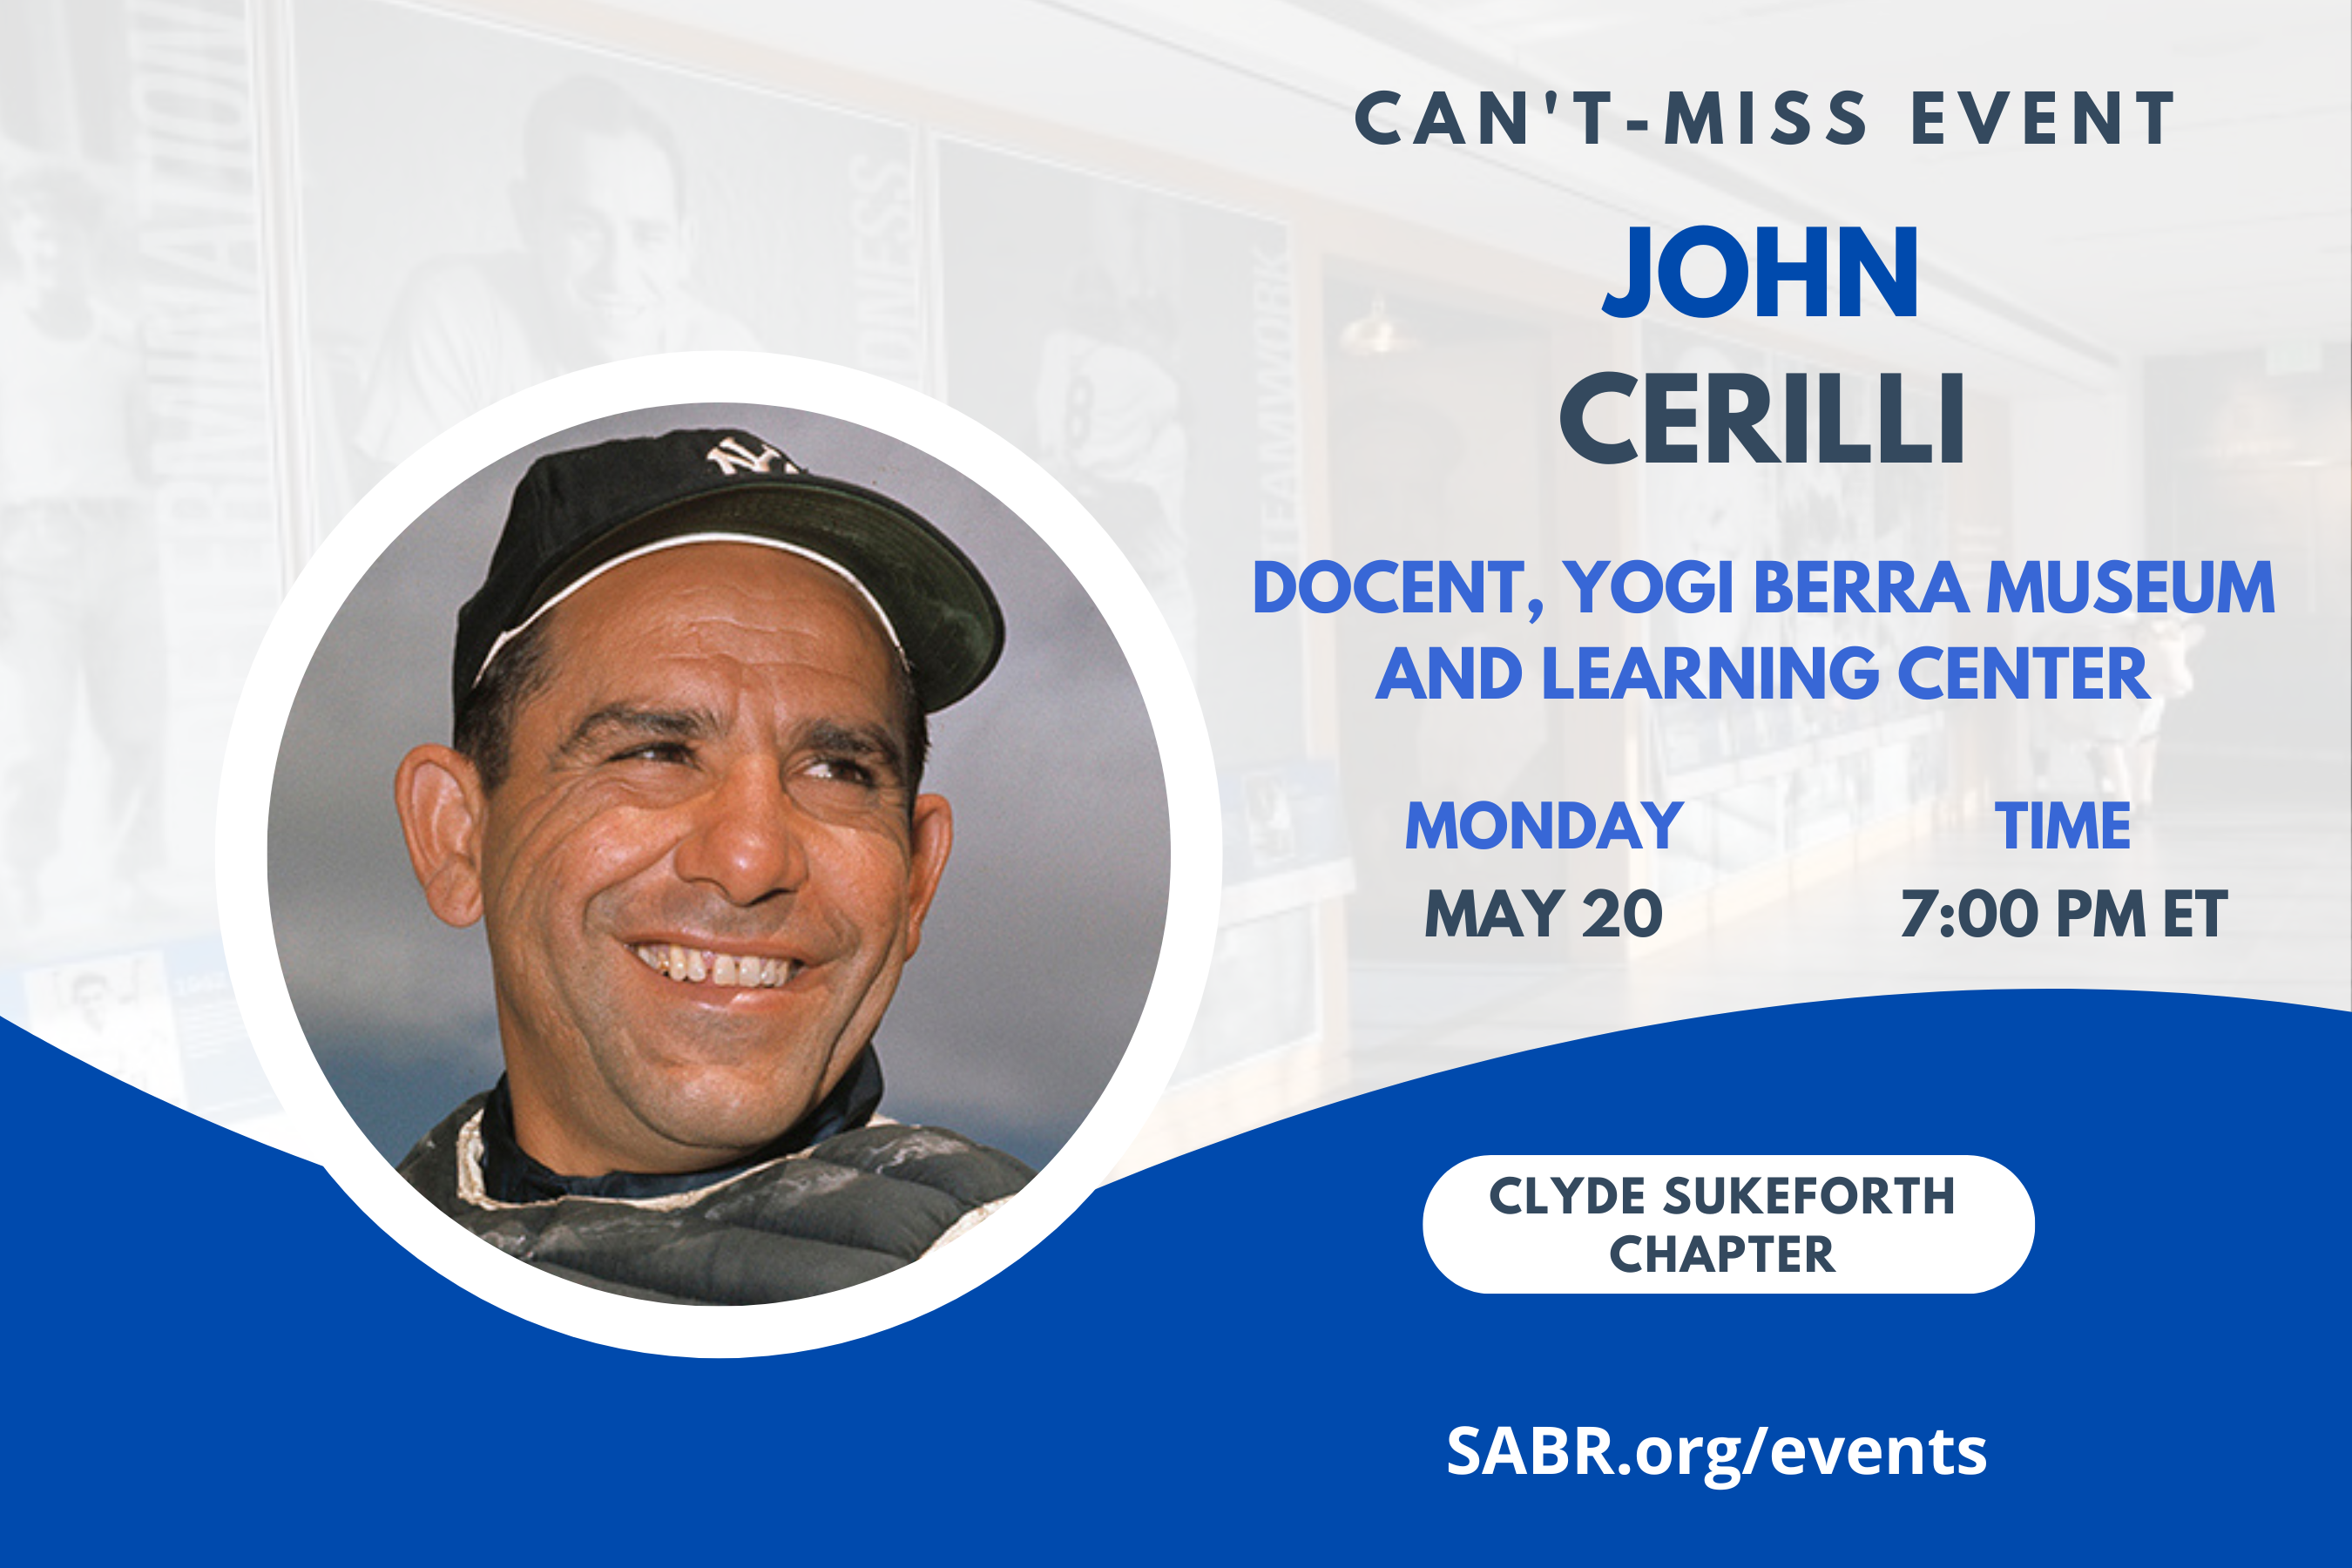 The Clyde Sukerforth Chapter (NH/ME), jointly with the Gardner-Waterman Chapter (VT), presents John Cerilli in a virtual Zoom meeting at 7:00 p.m. Eastern on Monday, May 20, 2024. All baseball fans are invited to attend. John is a SABR member and docent at the Yogi Berra Museum & Learning Center. His baseball travels are extensive, and he will give a presentation entitled “Take Me Out to the Ballpark" with his review and rankings of all 30 current MLB ballparks.